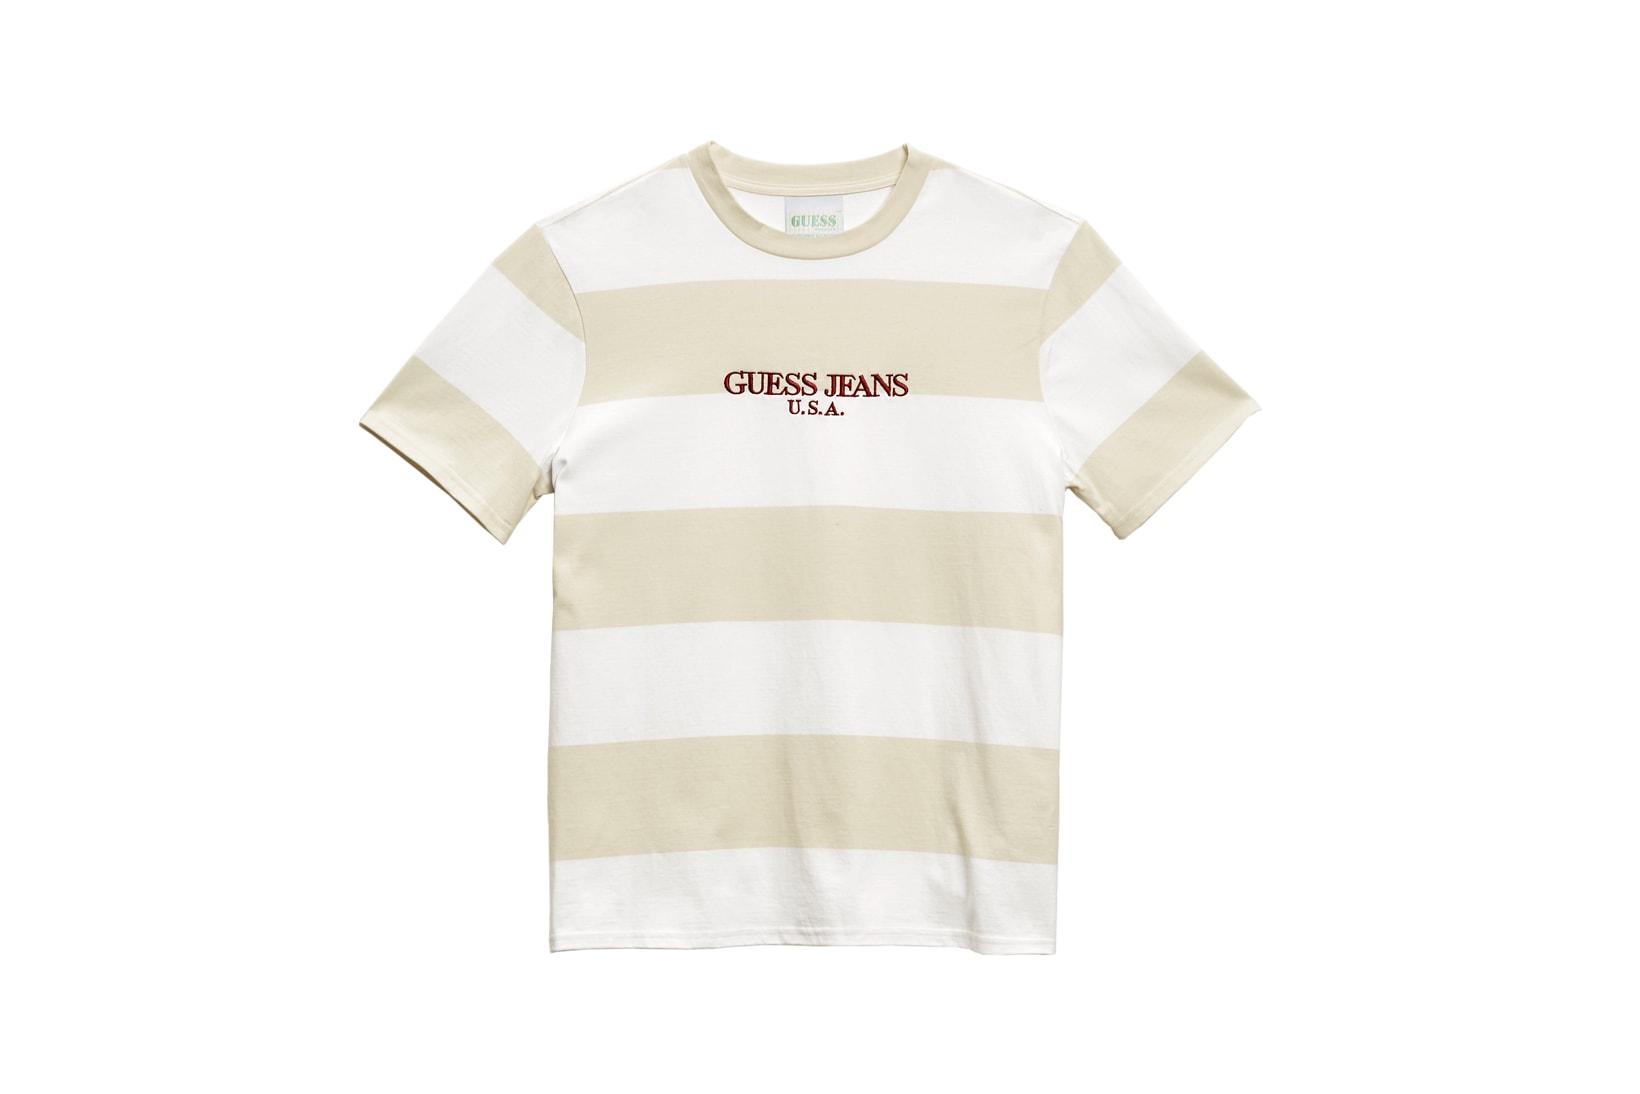 GUESS Jeans U.S.A. Farmers Market Capsule Collection Striped T-Shirt White Tan